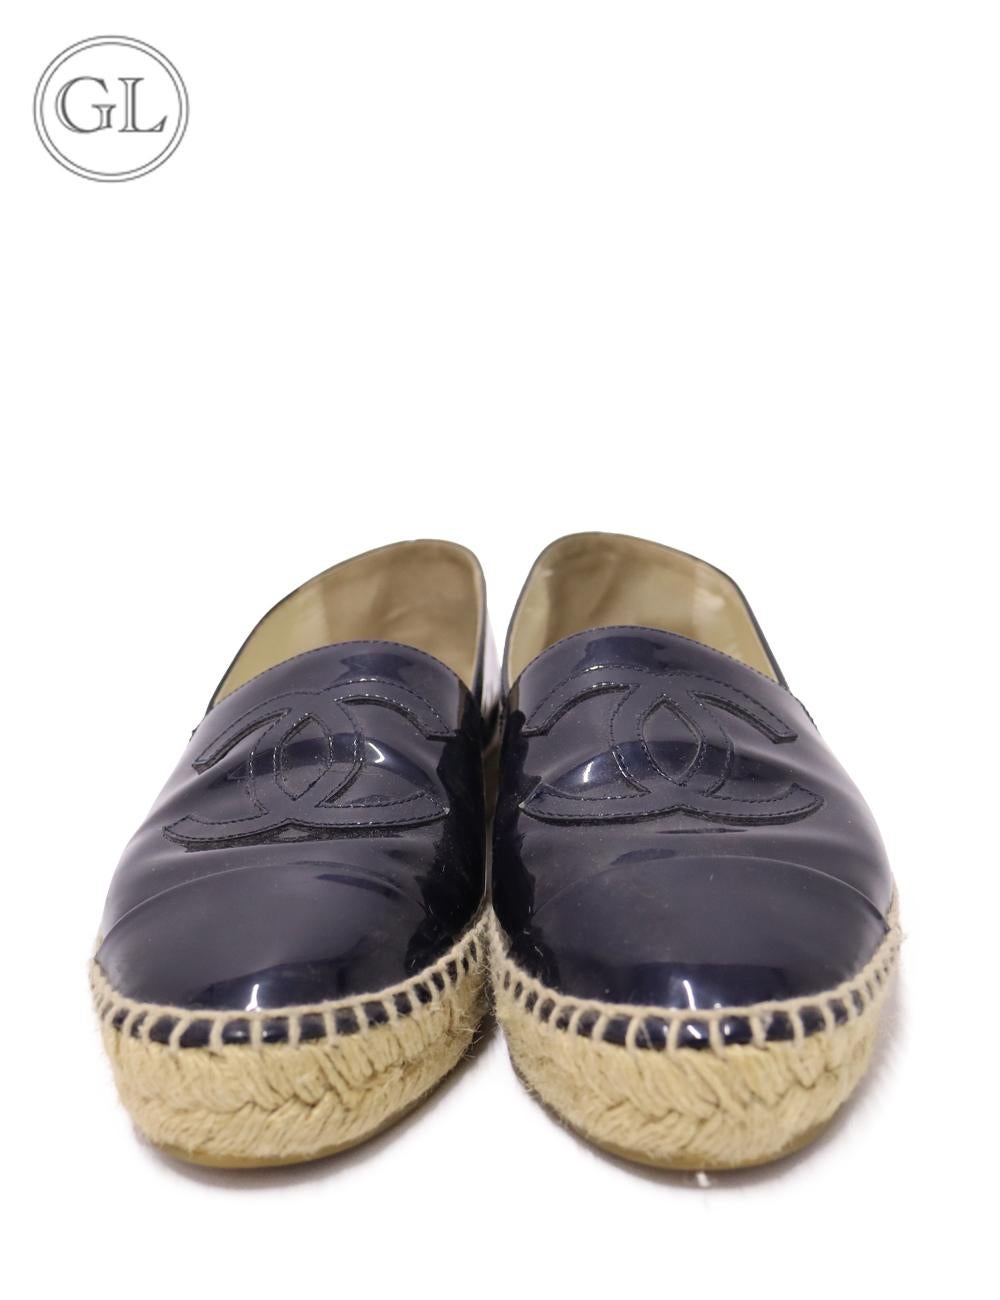 Chanel Navy Patent Lambskin Leather Espadrilles EU 38 In Good Condition For Sale In Amman, JO